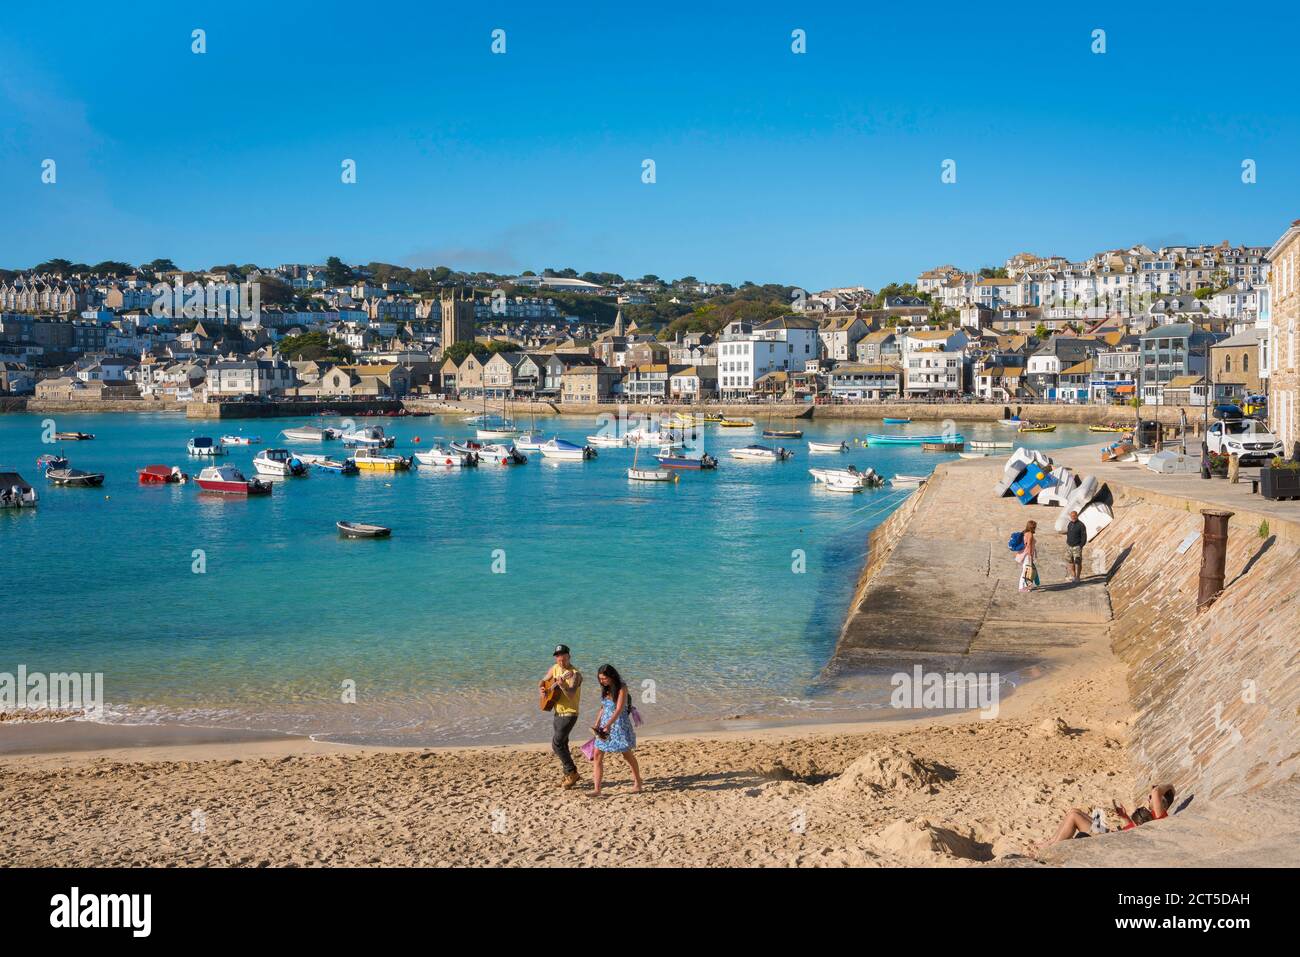 St Ives Cornwall, view in summer of the harbour area in the resort town of St Ives, Cornwall, south west England, UK Stock Photo